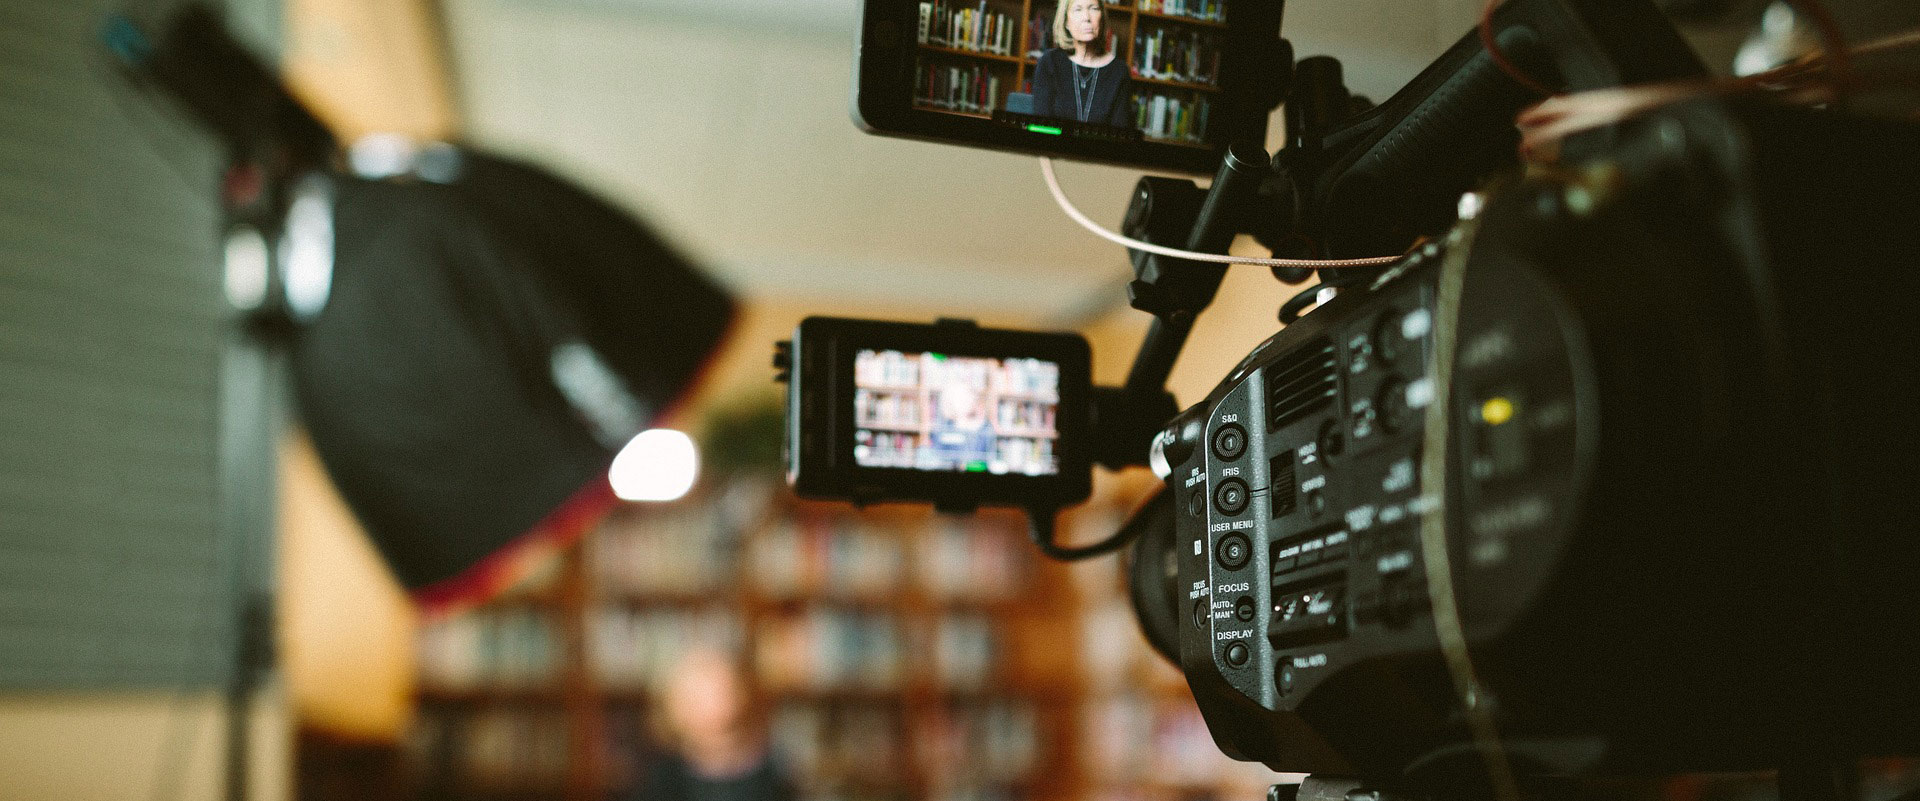 Four Benefits of Using Video in Your Marketing Strategy